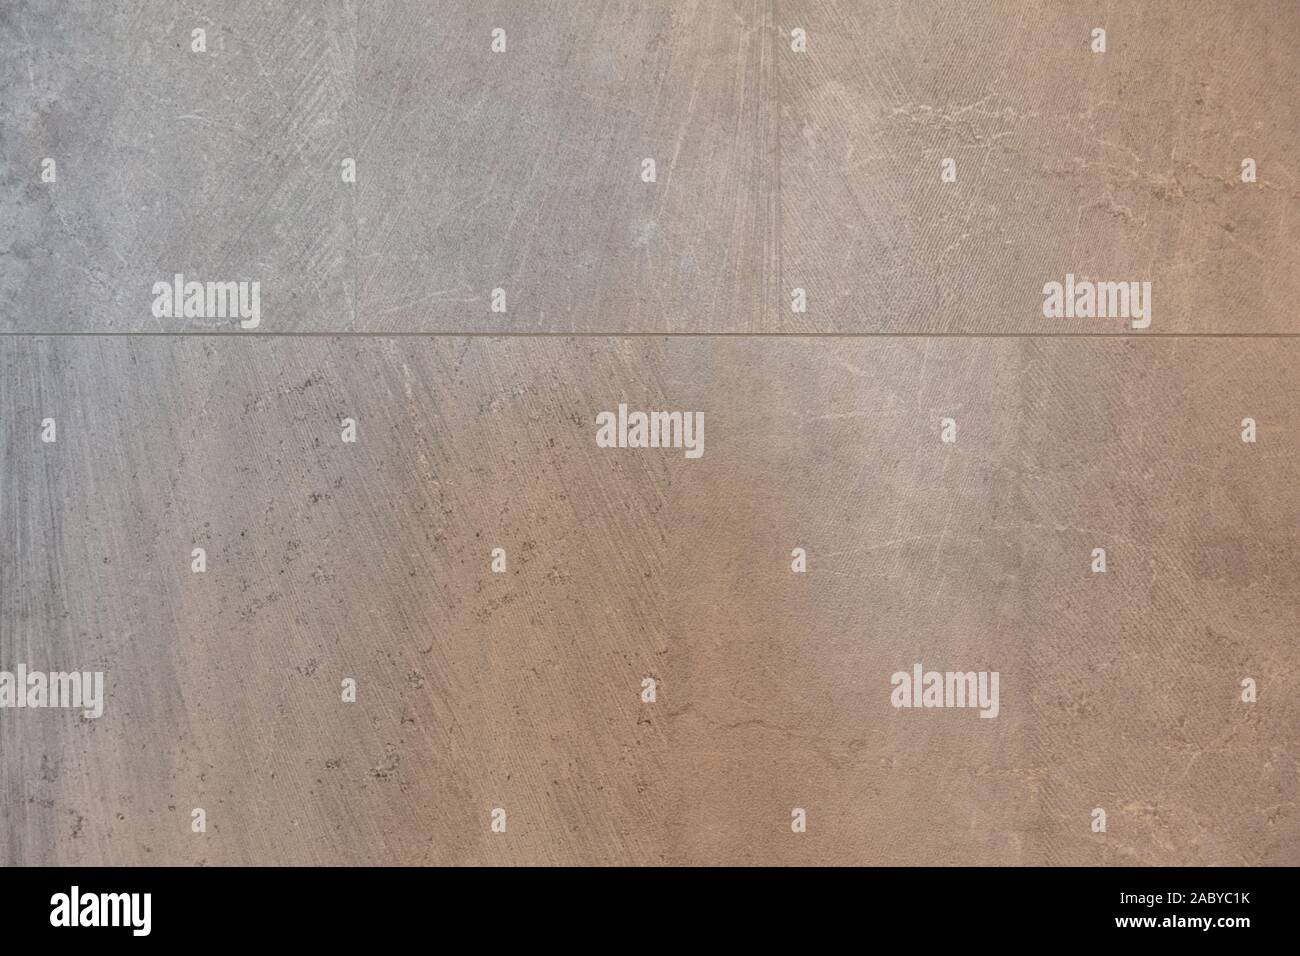 Granite Stone Tiles Interior Wall And Floor Covering Background